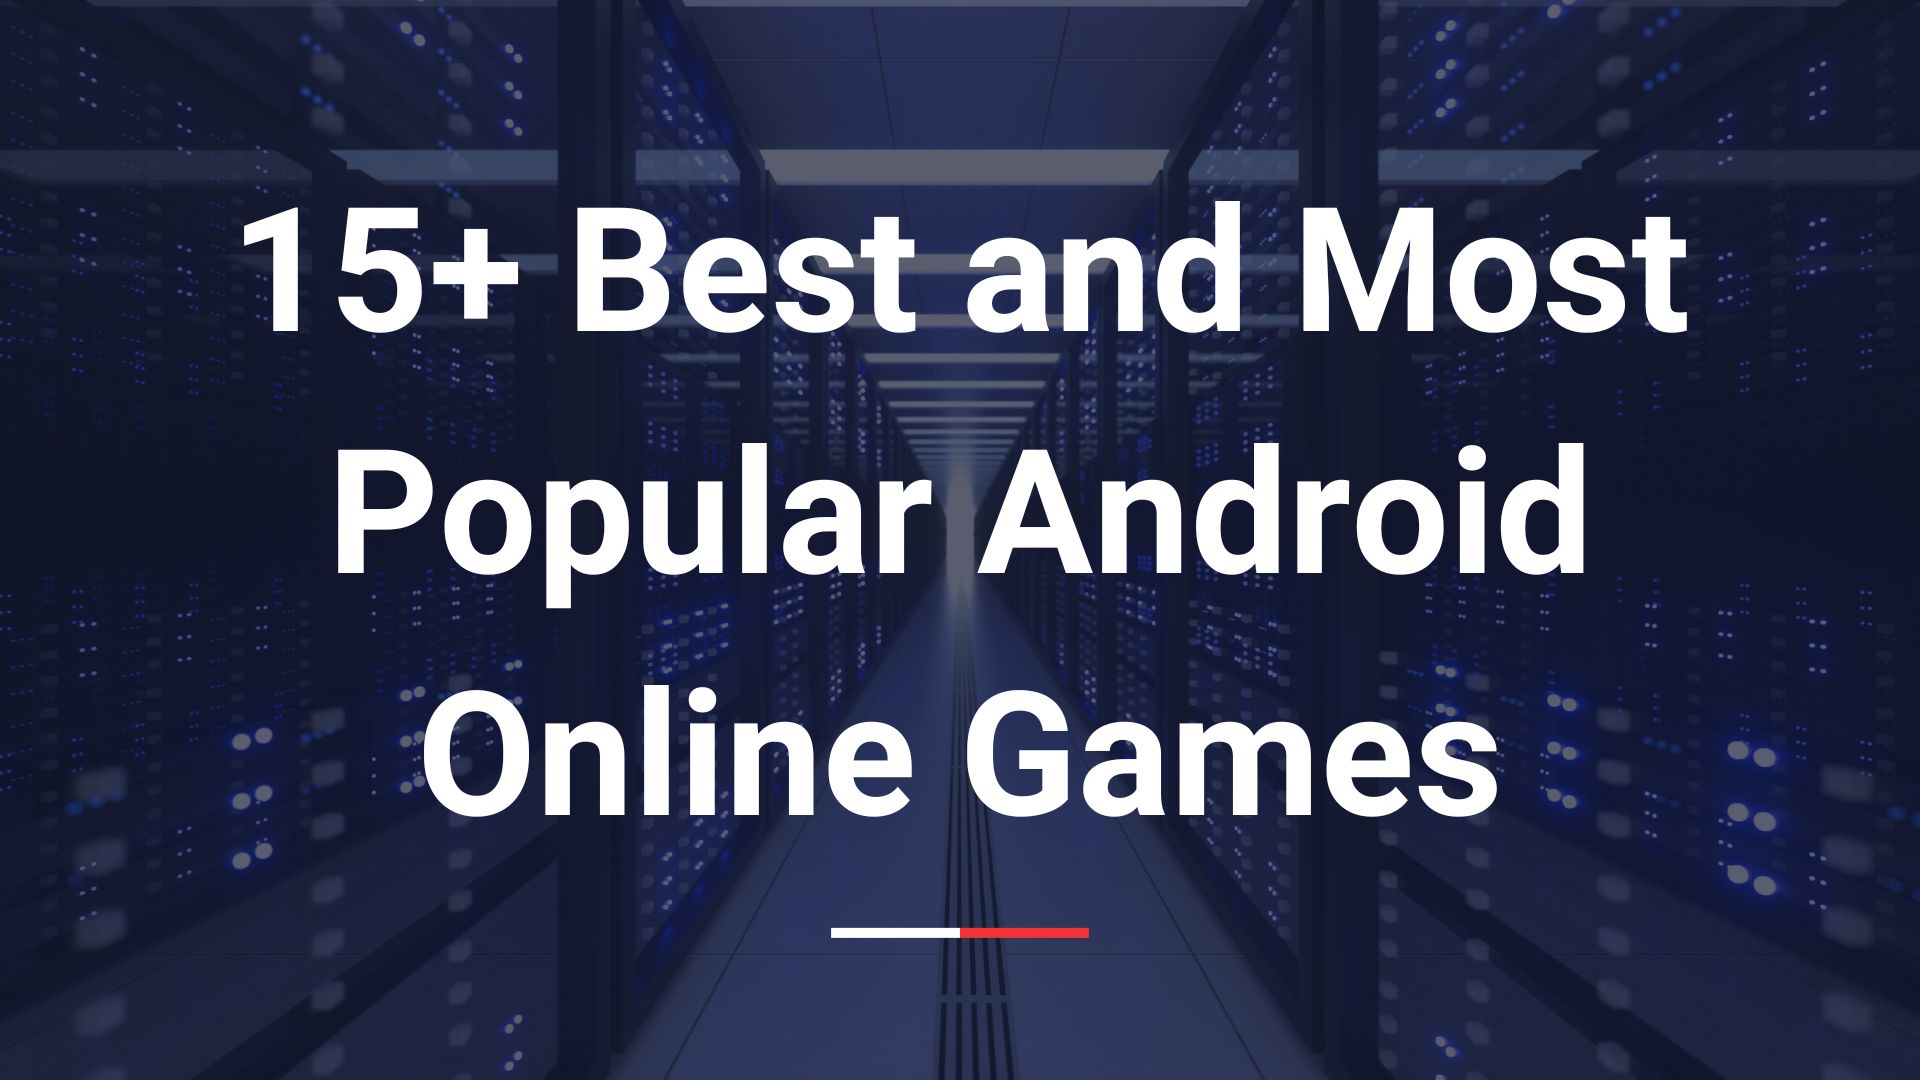 15+ Best and Most Popular Android Online Games